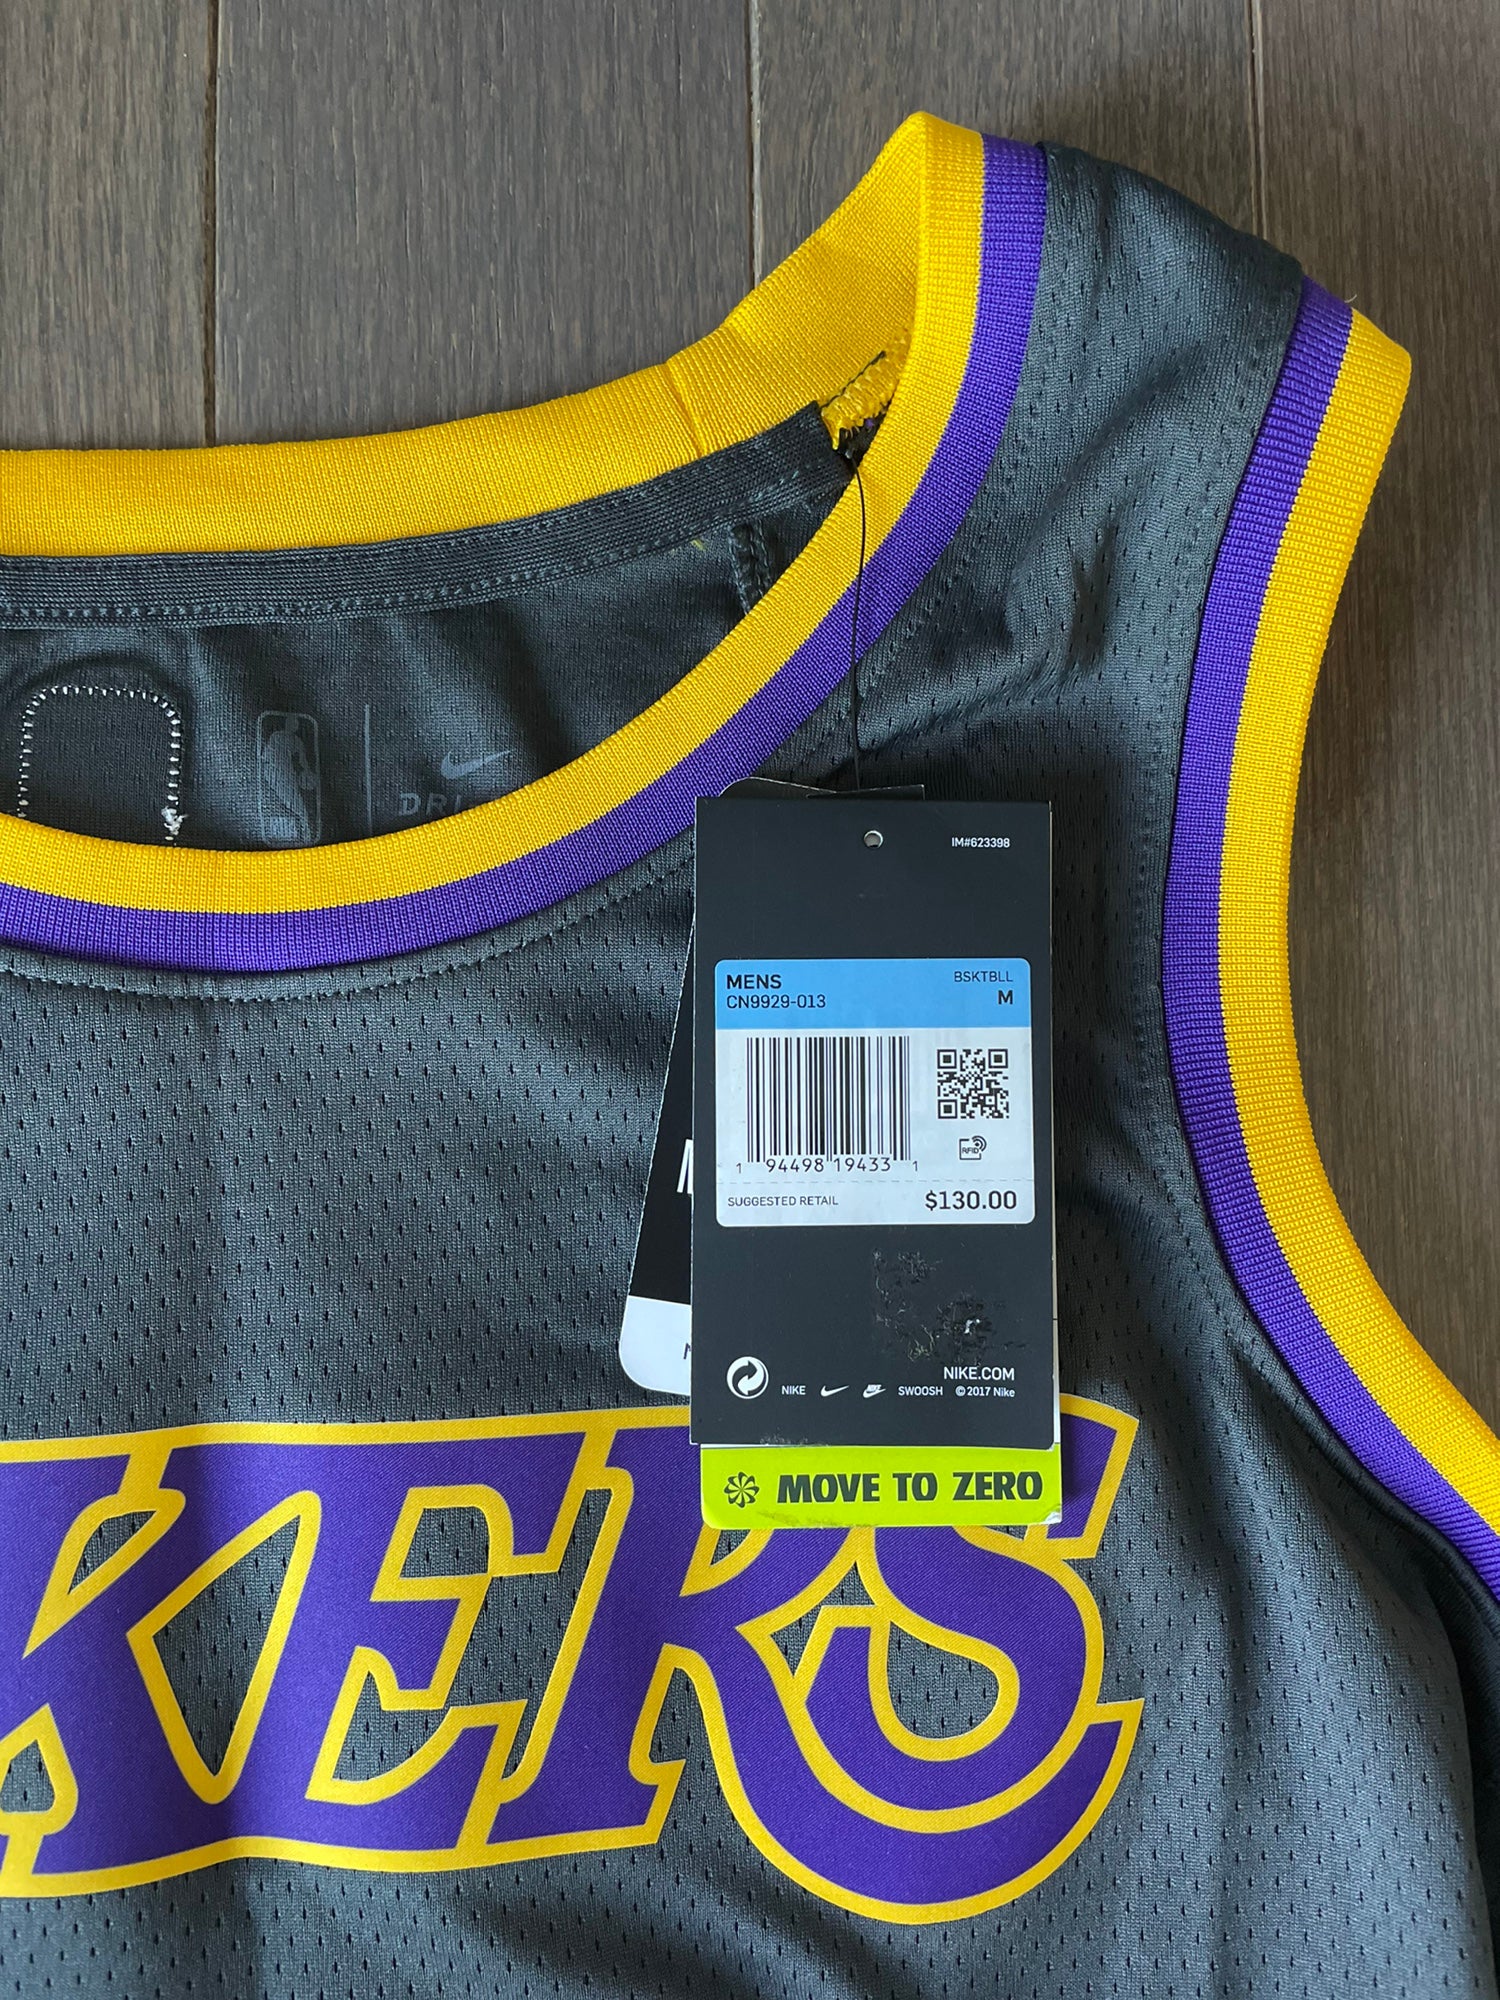 2021-2022 Earned Edition Los Angeles Lakers Black #24 NBA Jersey